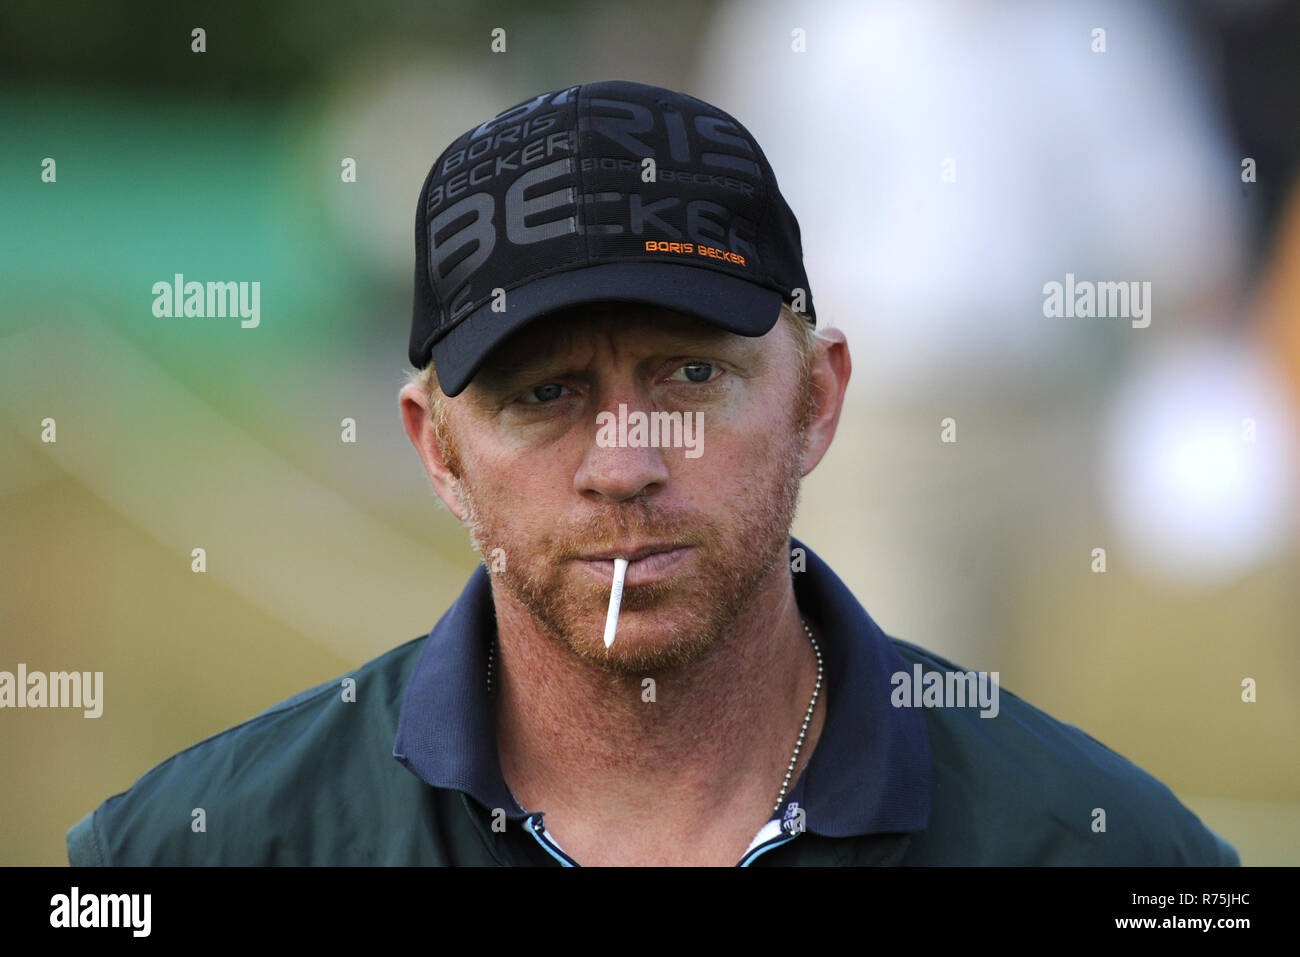 Cologne-Pulheim, Germany. 10th Sep, 2008. Ex-tennis professional Boris Becker takes part in the Mercedes-Benz Championship Pro-Am at the golf course of 'Gut Laerchenhof' in Cologne-Pulheim, Germany, 10 September 2008. Credit: Joerg Carstensen | usage worldwide/dpa/Alamy Live News Stock Photo